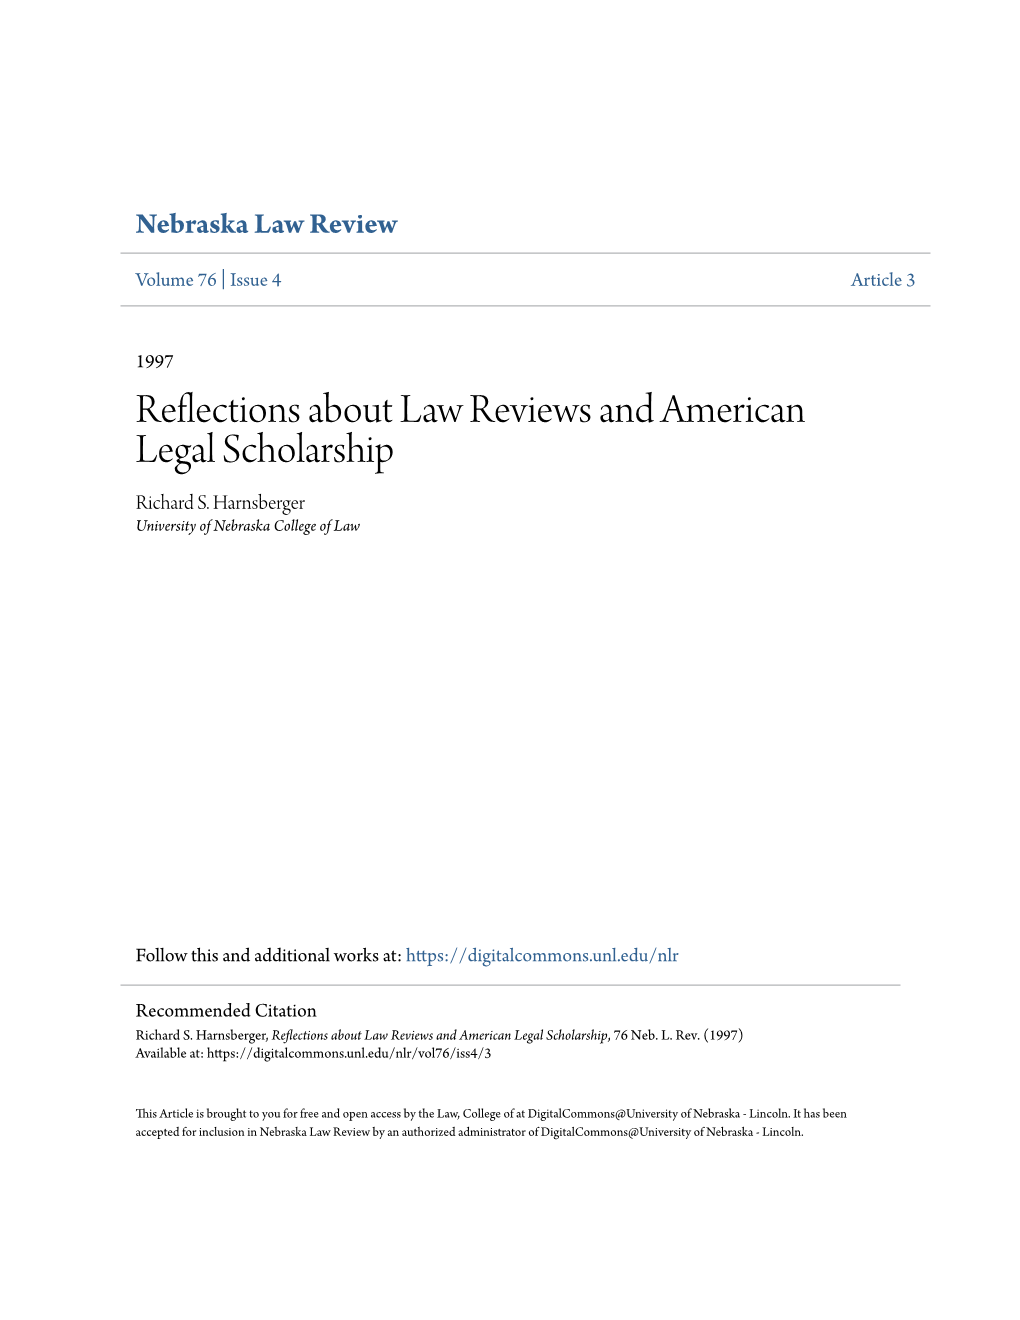 Reflections About Law Reviews and American Legal Scholarship Richard S